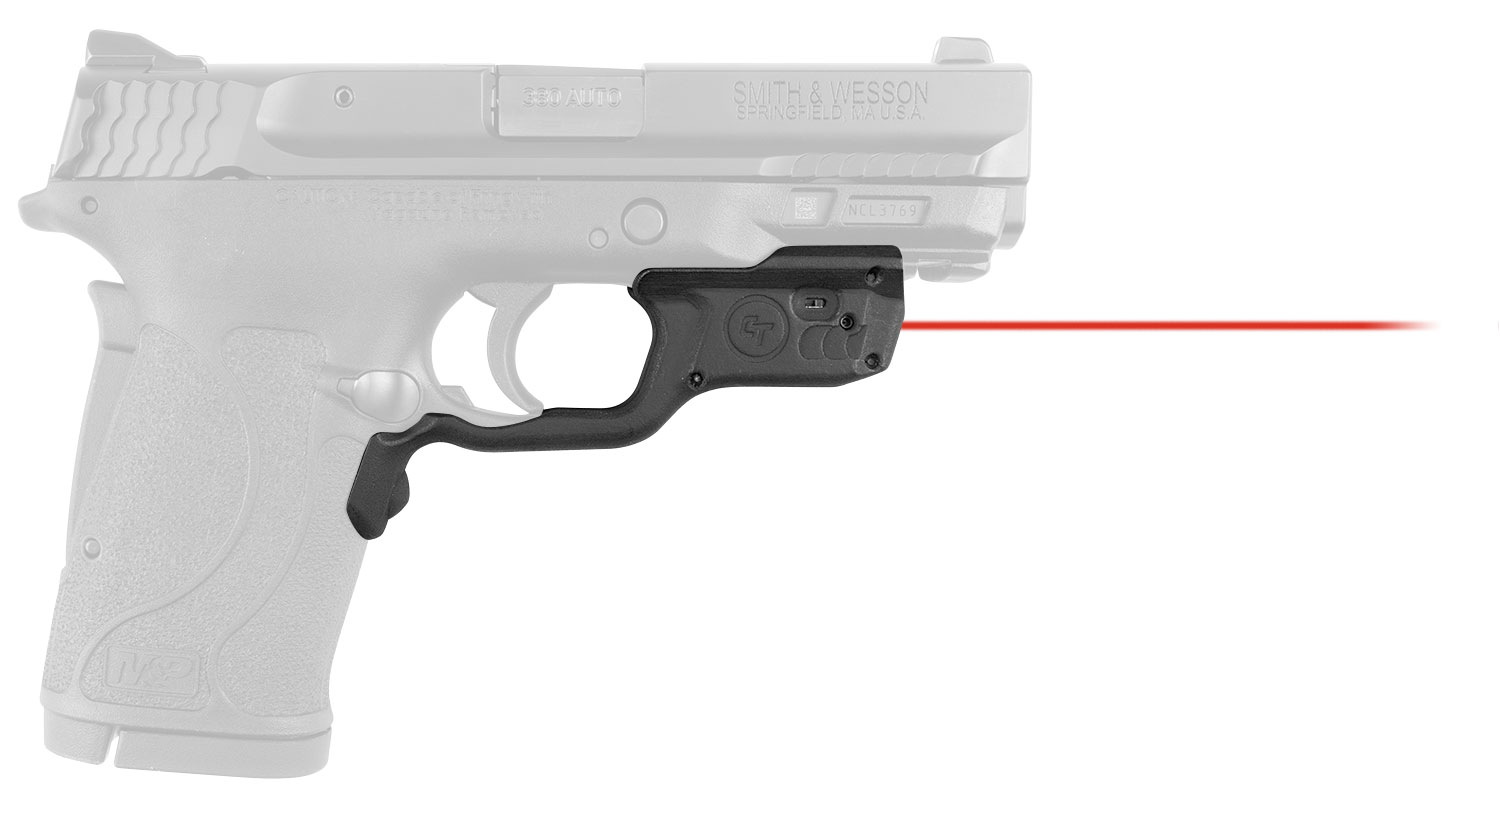 Crimson Trace LG459 Laserguard  5mW Red Laser with 633nM Wavelength & Black Finish for 22 S&W M&P Compact, 380/9 M&P Shield EZ